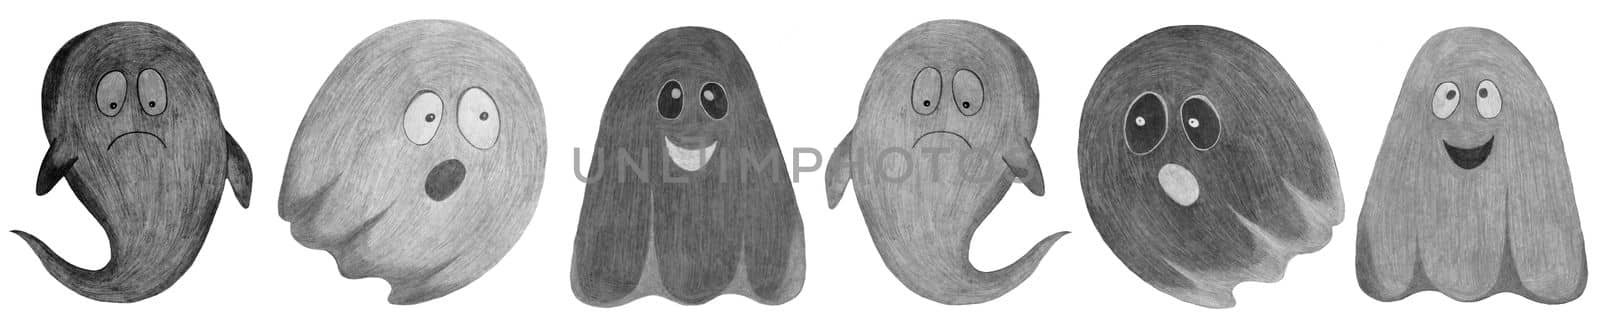 Set of Hand Drawn Halloween Ghosts Isolated on White Background. Halloween scary ghostly monsters. Cute cartoon spooky character, Drawn by Color Pencils.